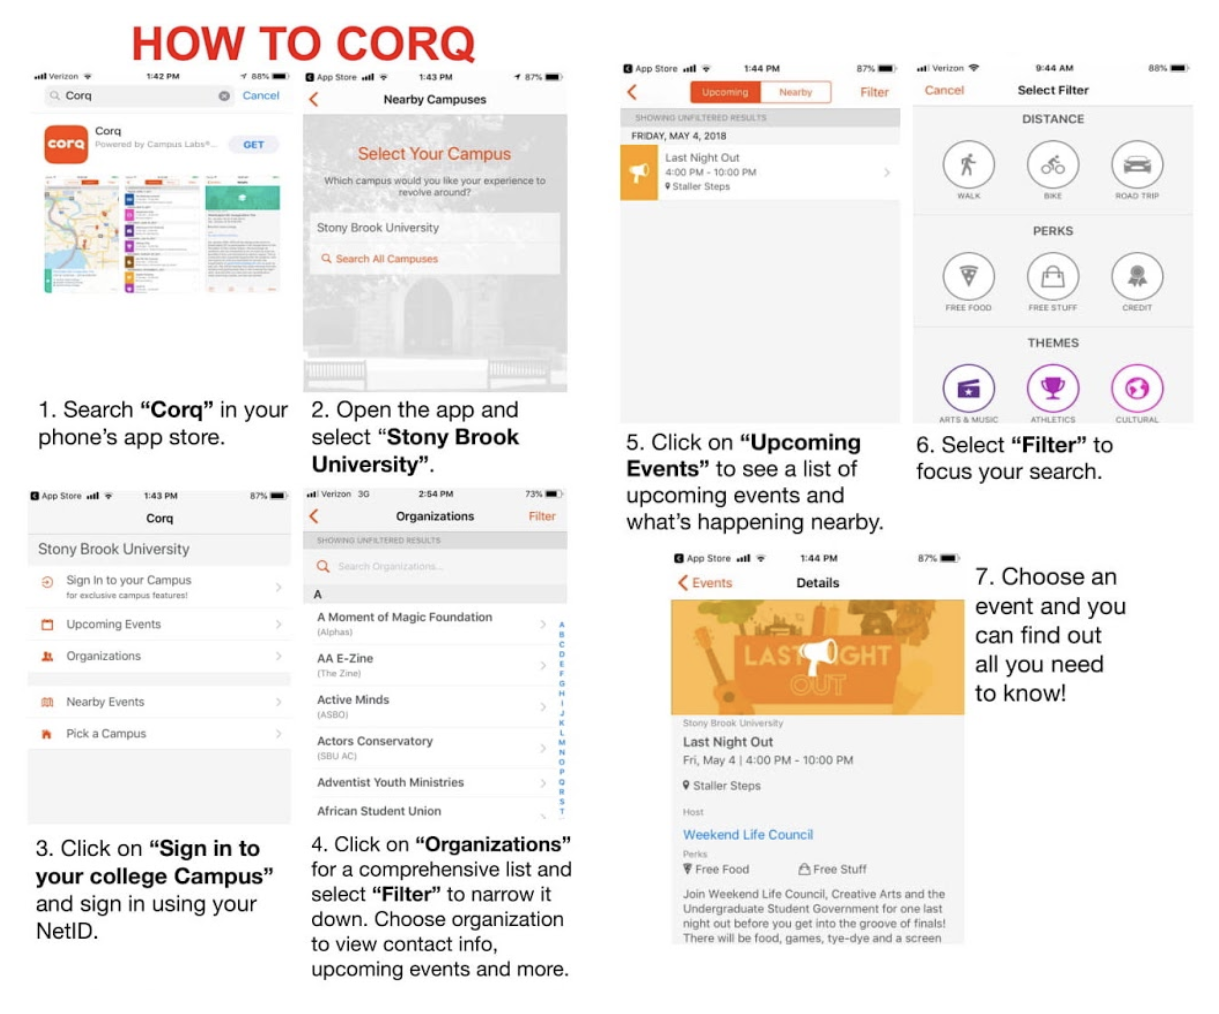 How to Corq